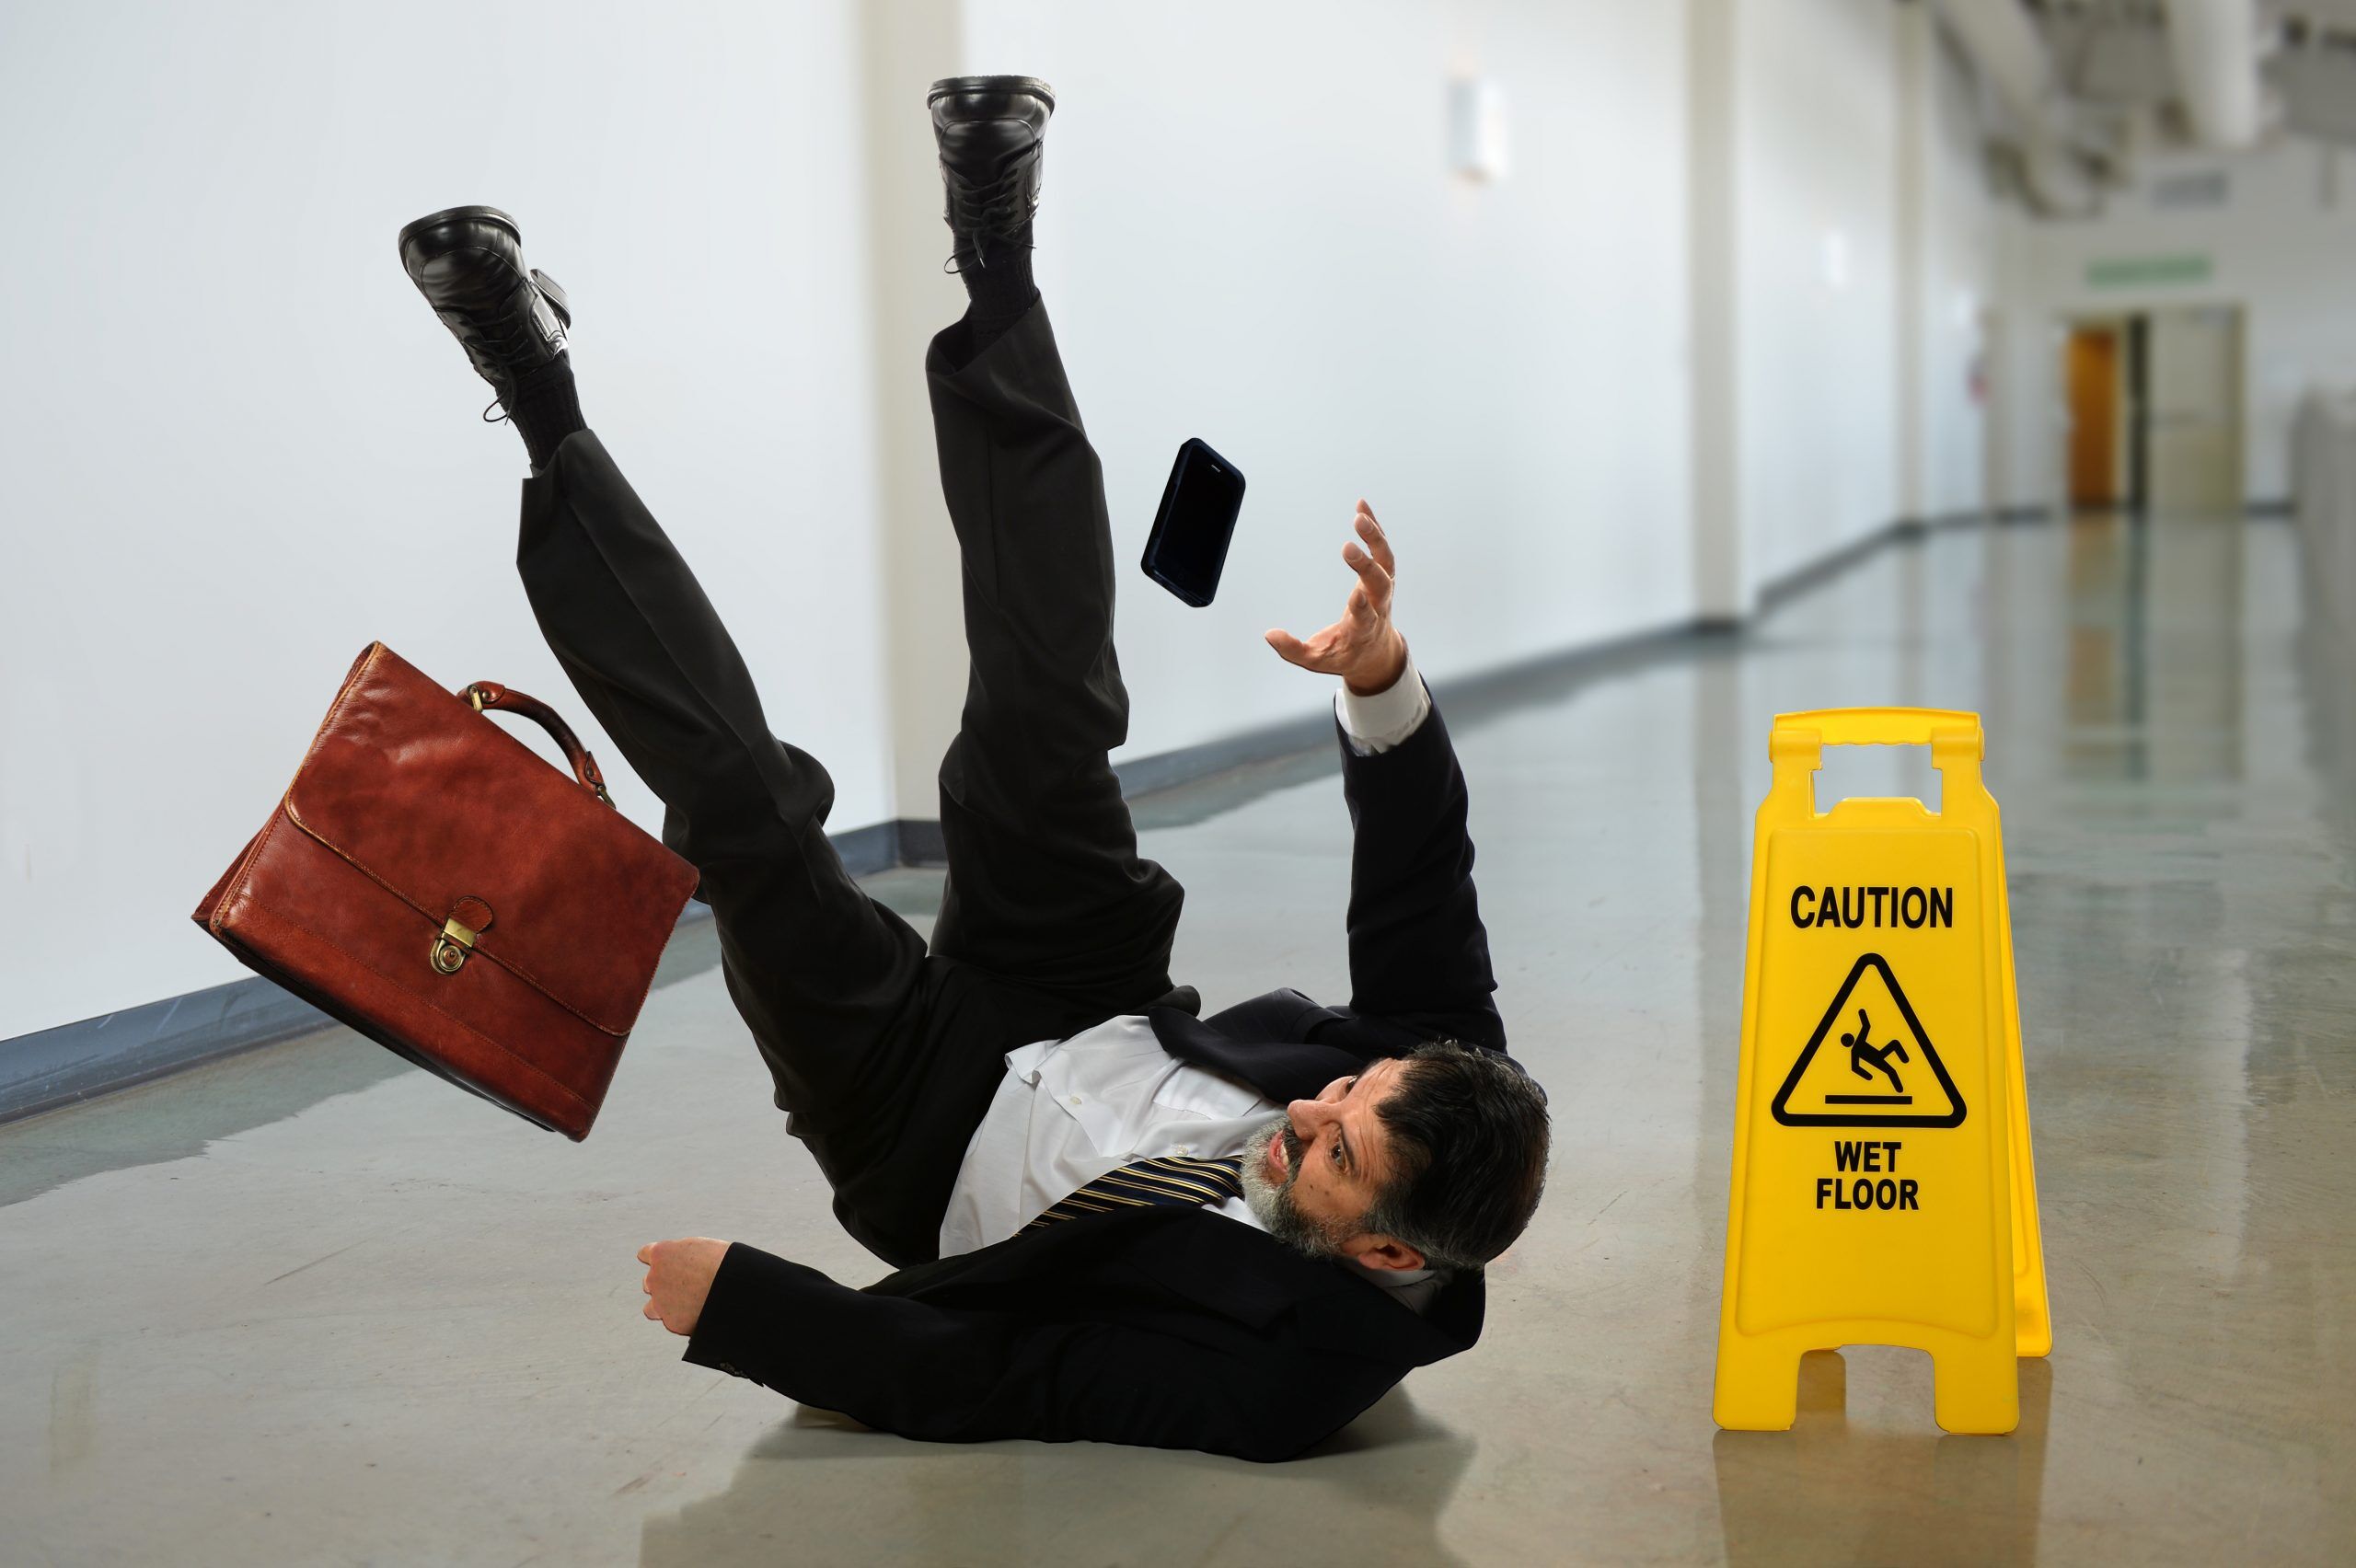 slip and fall accident on slippery floor